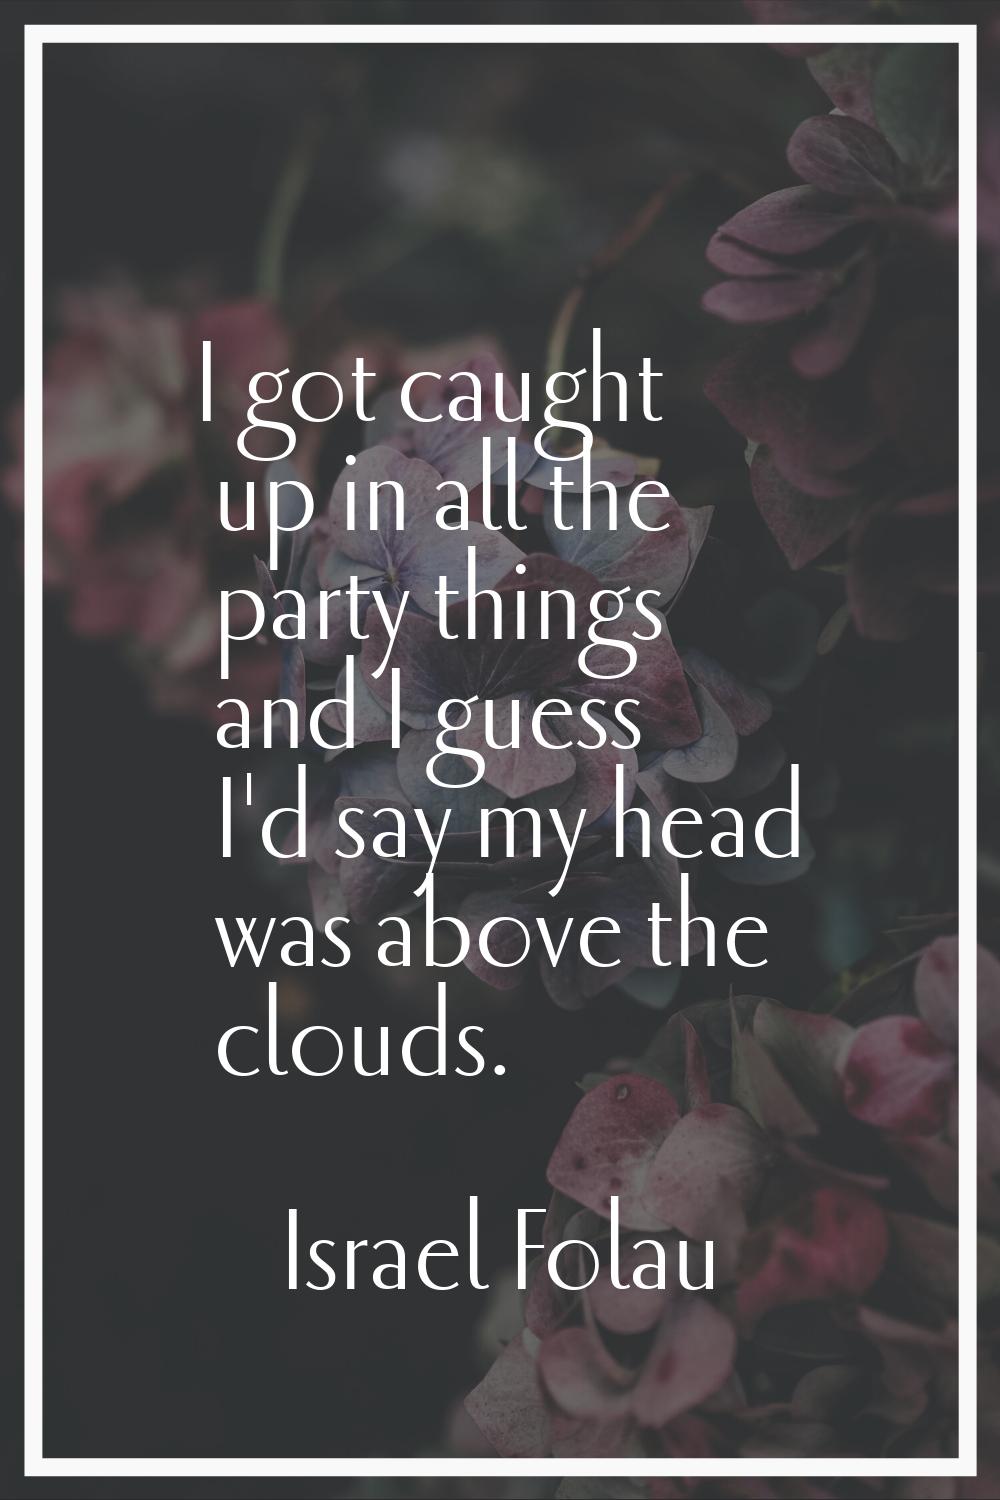 I got caught up in all the party things and I guess I'd say my head was above the clouds.